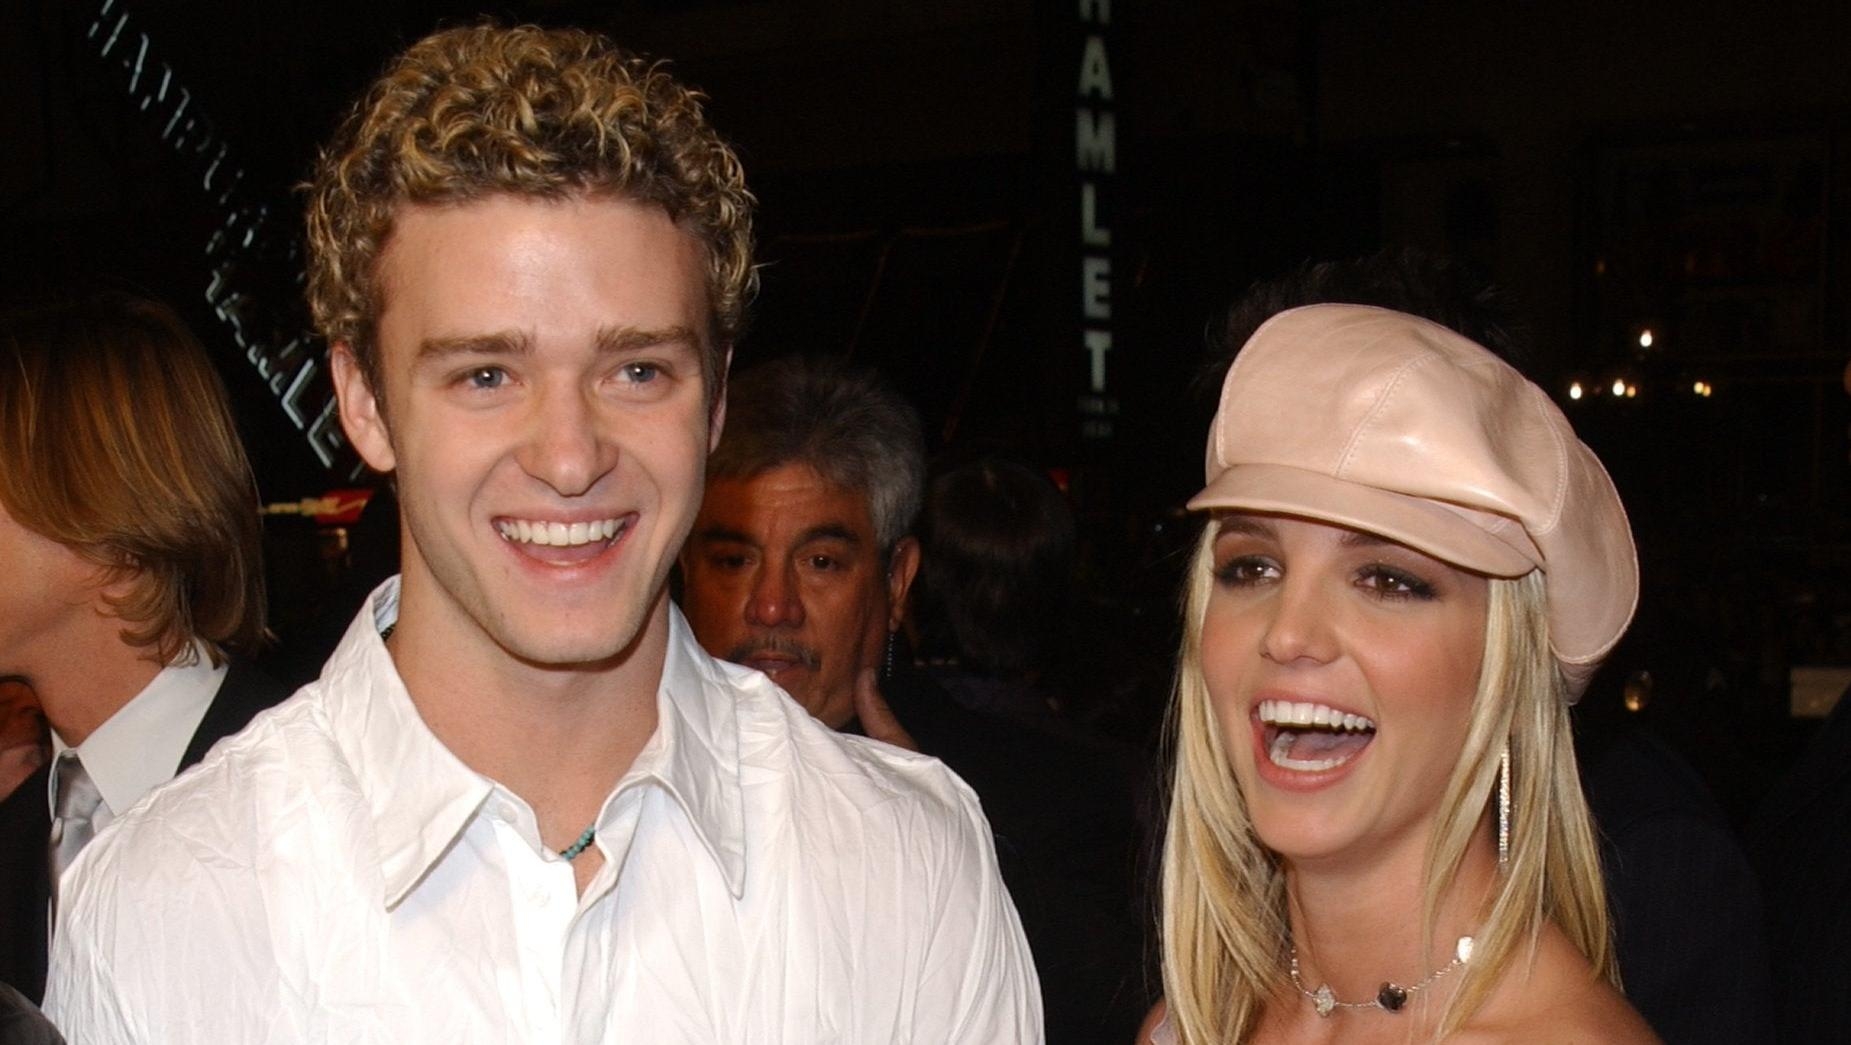 Justin Timberlake shares his support for Britney Spears following her conservatorship hearing